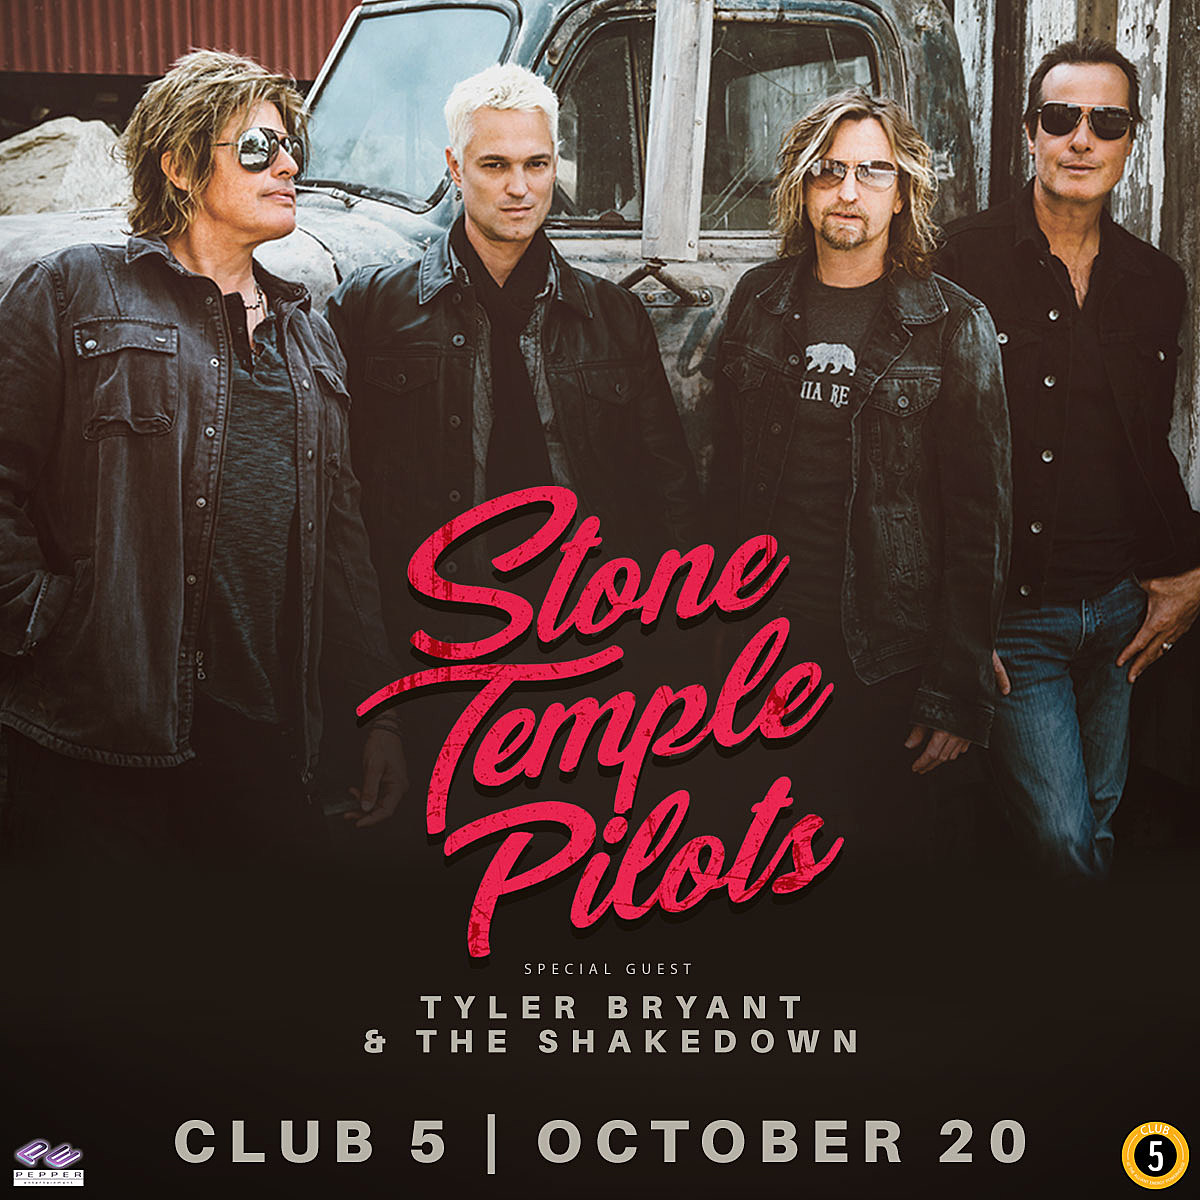 Rockers Stone Temple Pilots to Play in Cedar Rapids this October